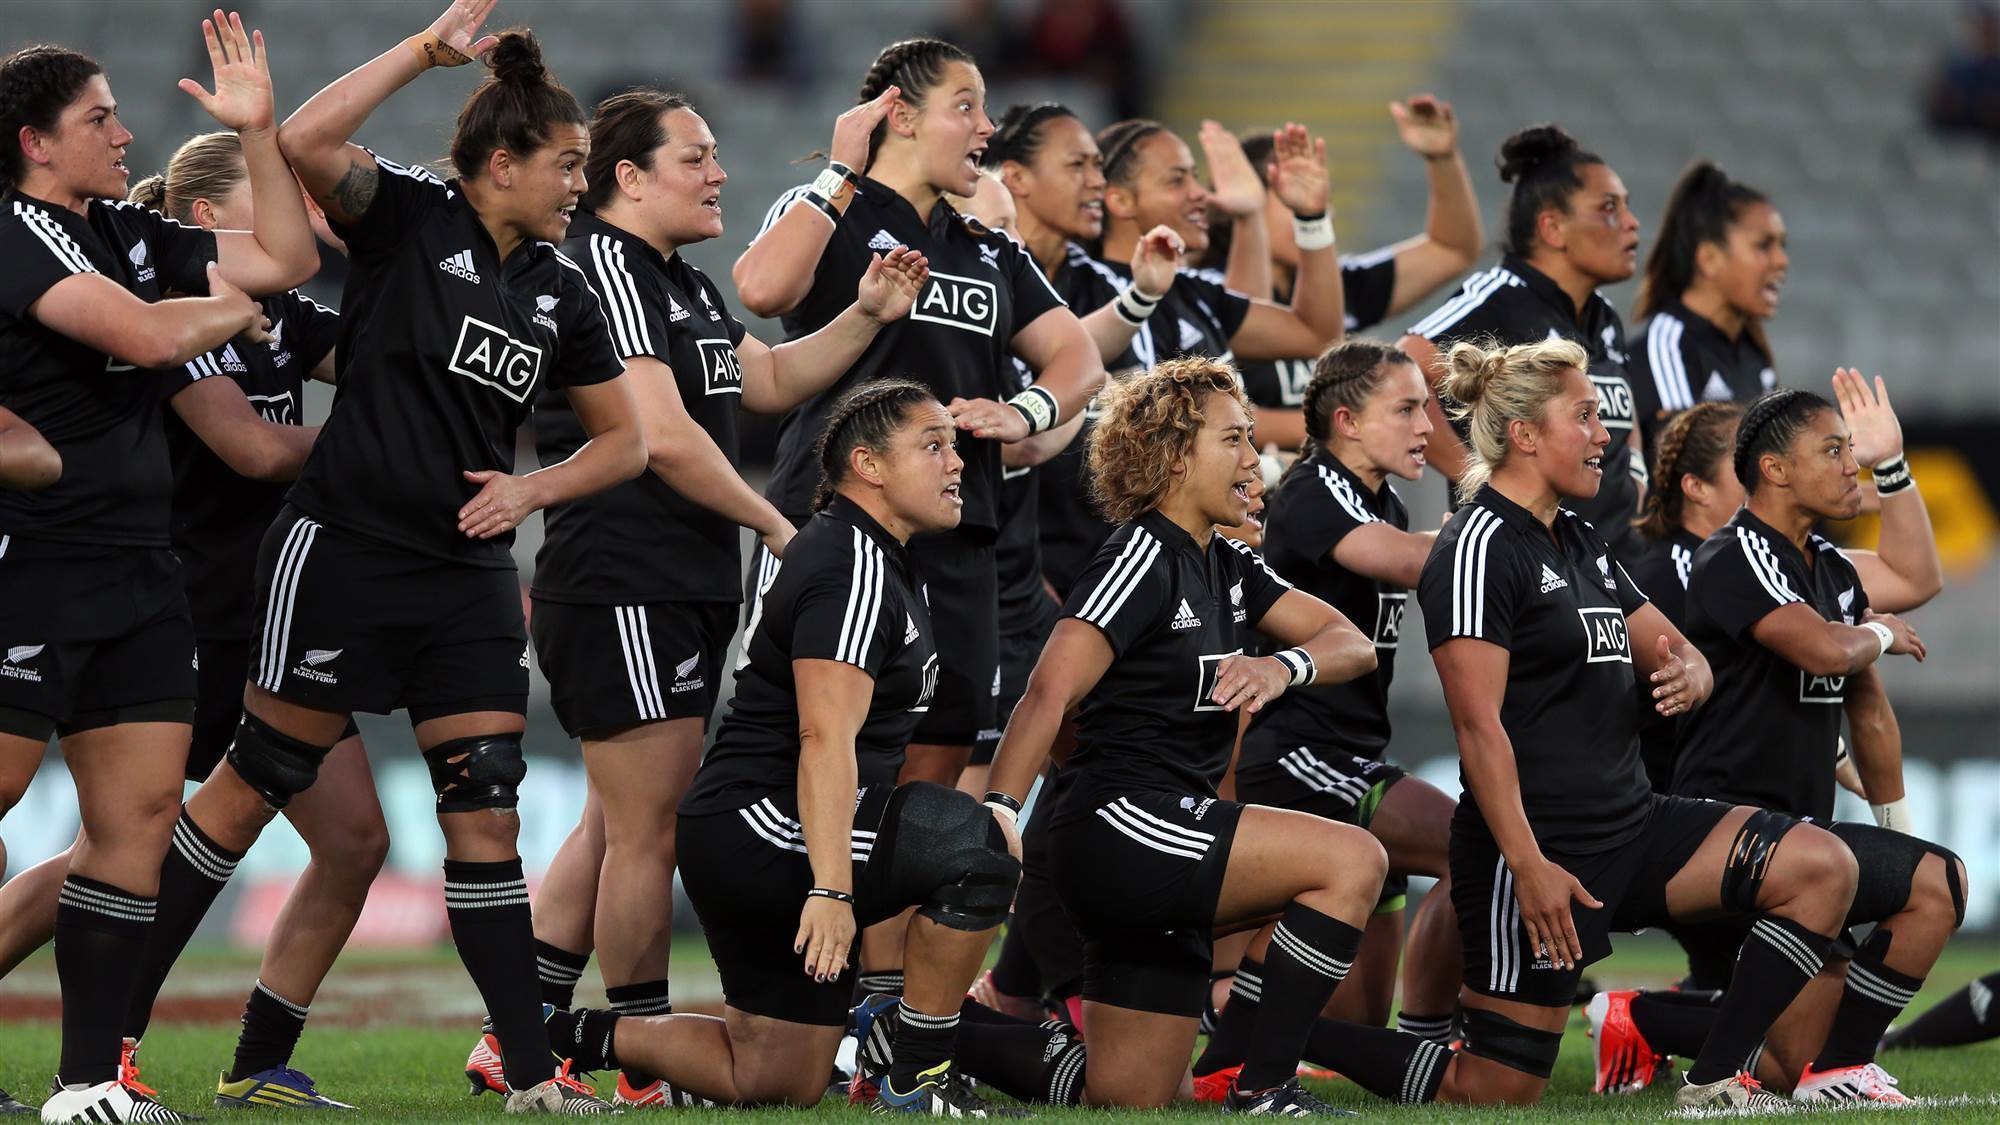 nz-government-willing-to-support-2021-rugby-world-cup-the-women-s